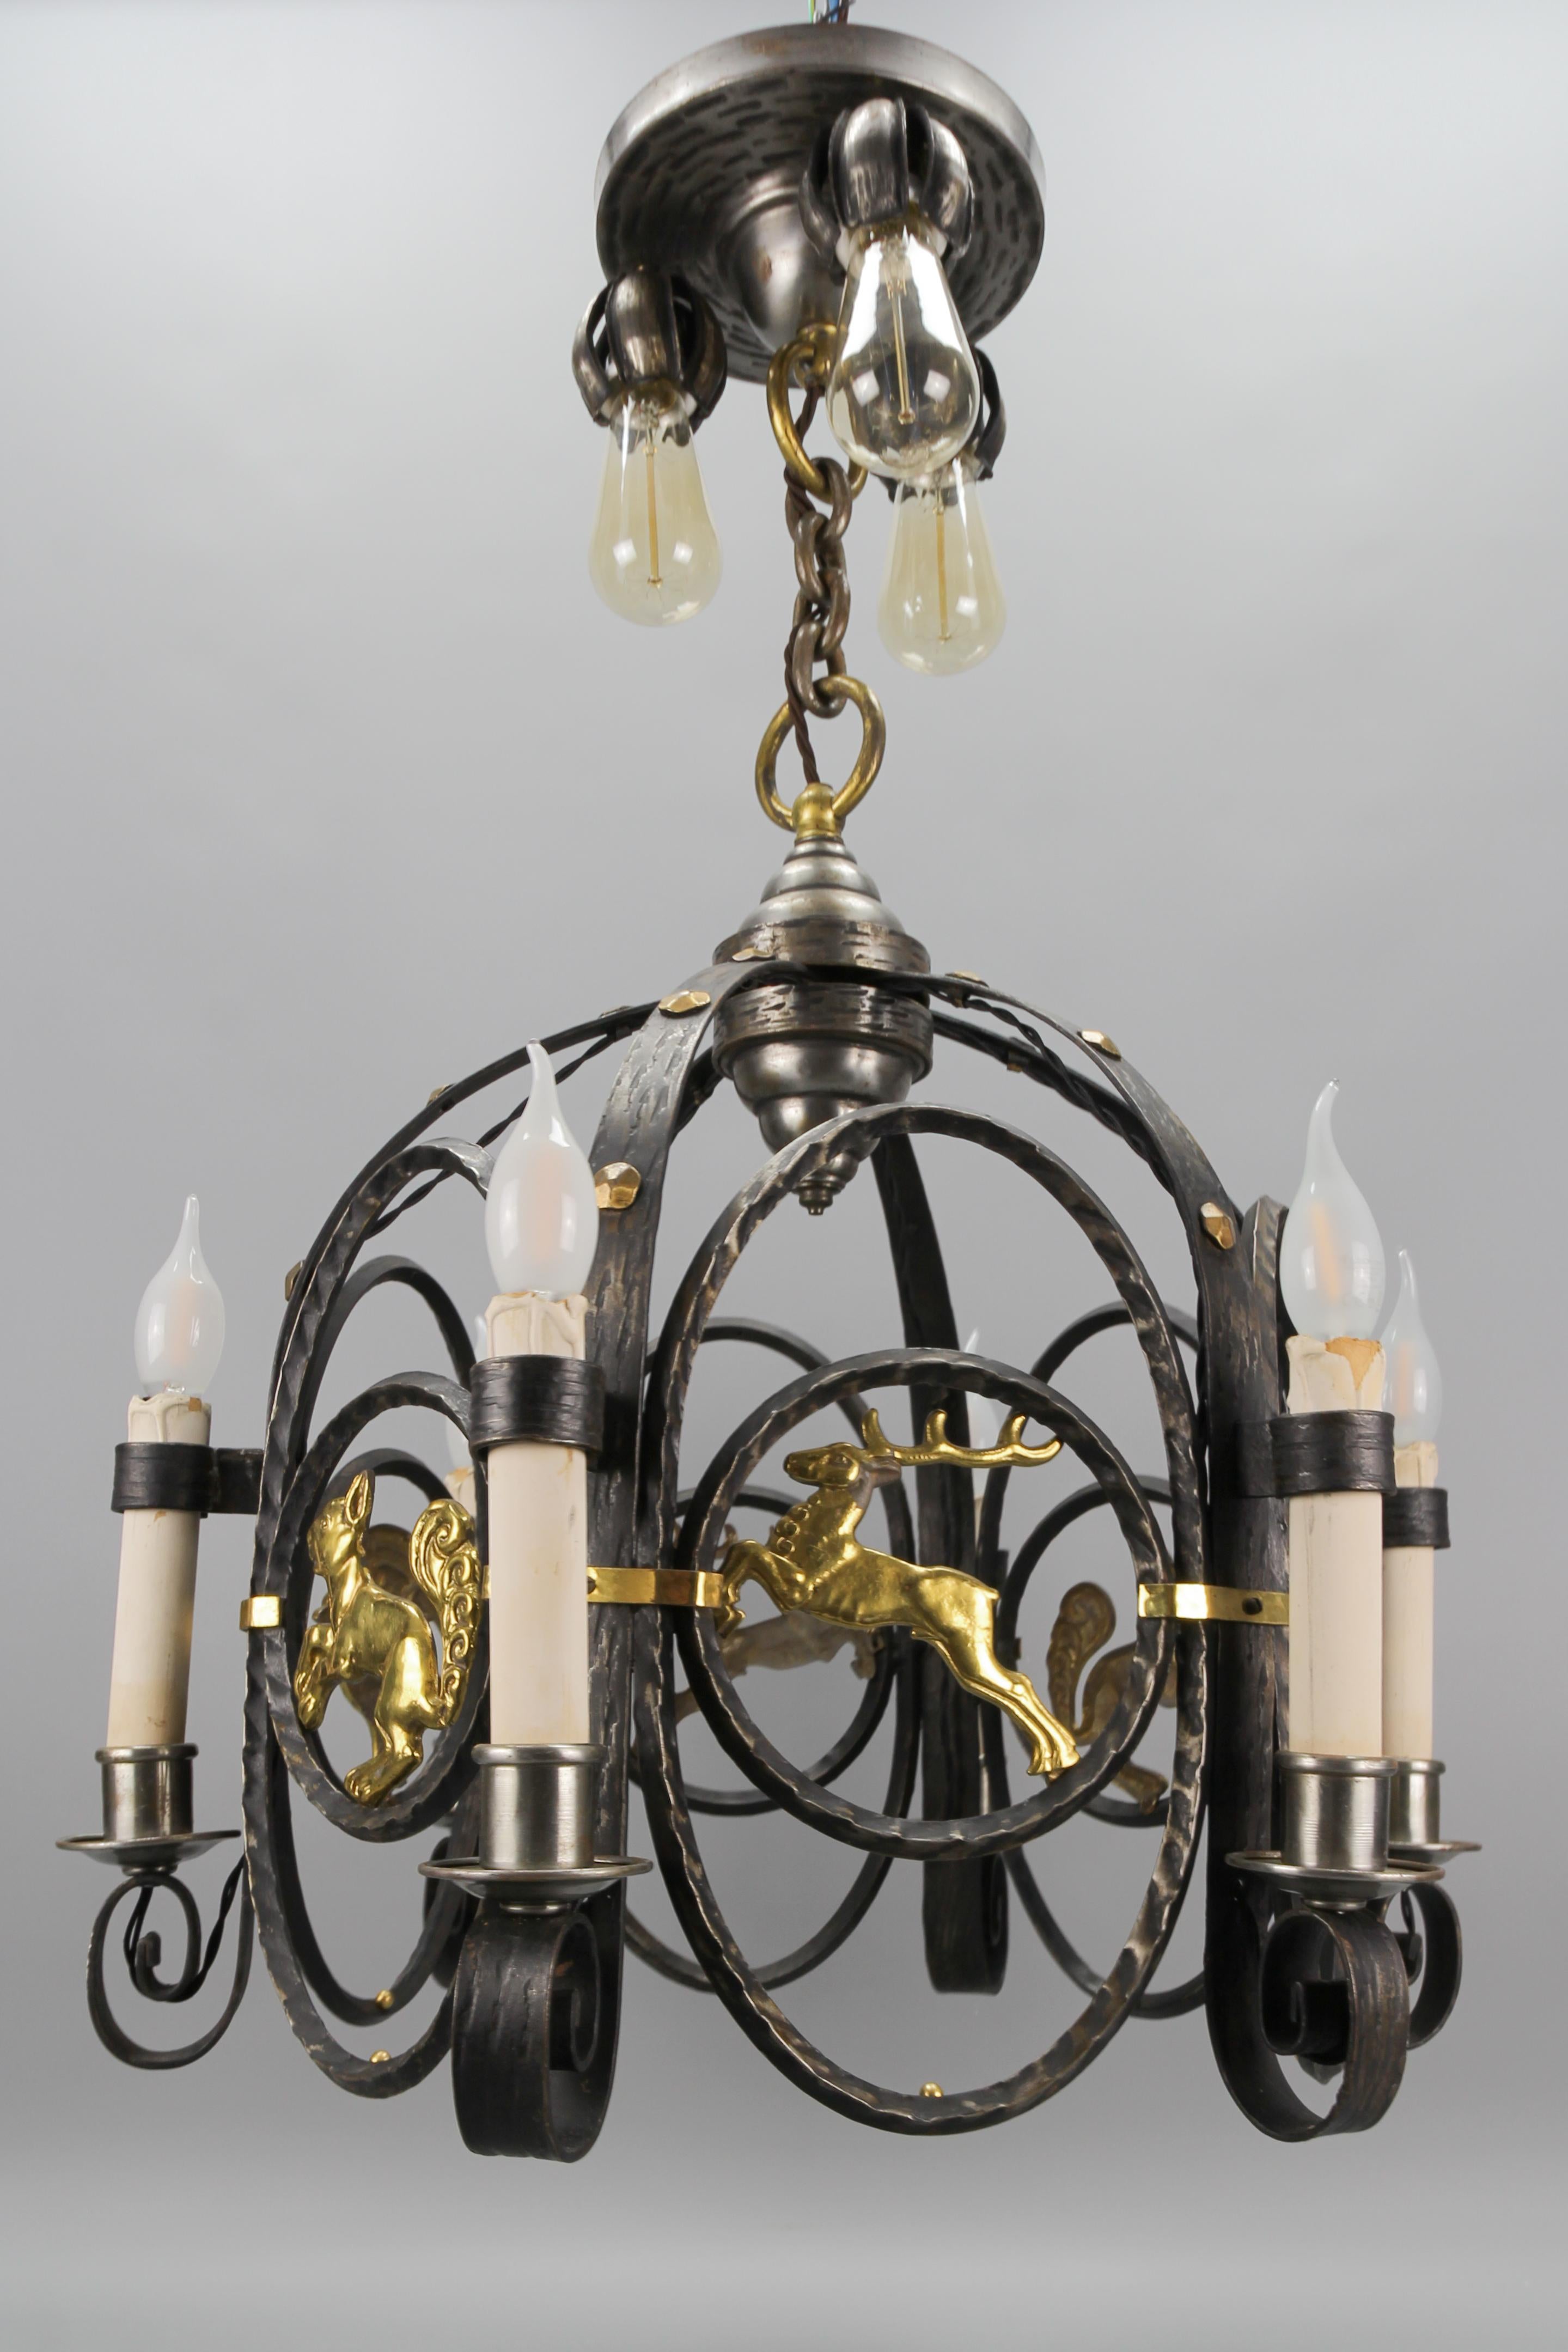 German Art Deco Nine-Light wrought iron and brass chandelier with animals, the 1920s.
This impressive German Art Deco period chandelier features a beautifully shaped wrought iron frame, adorned with decorative details made of brass and patinated